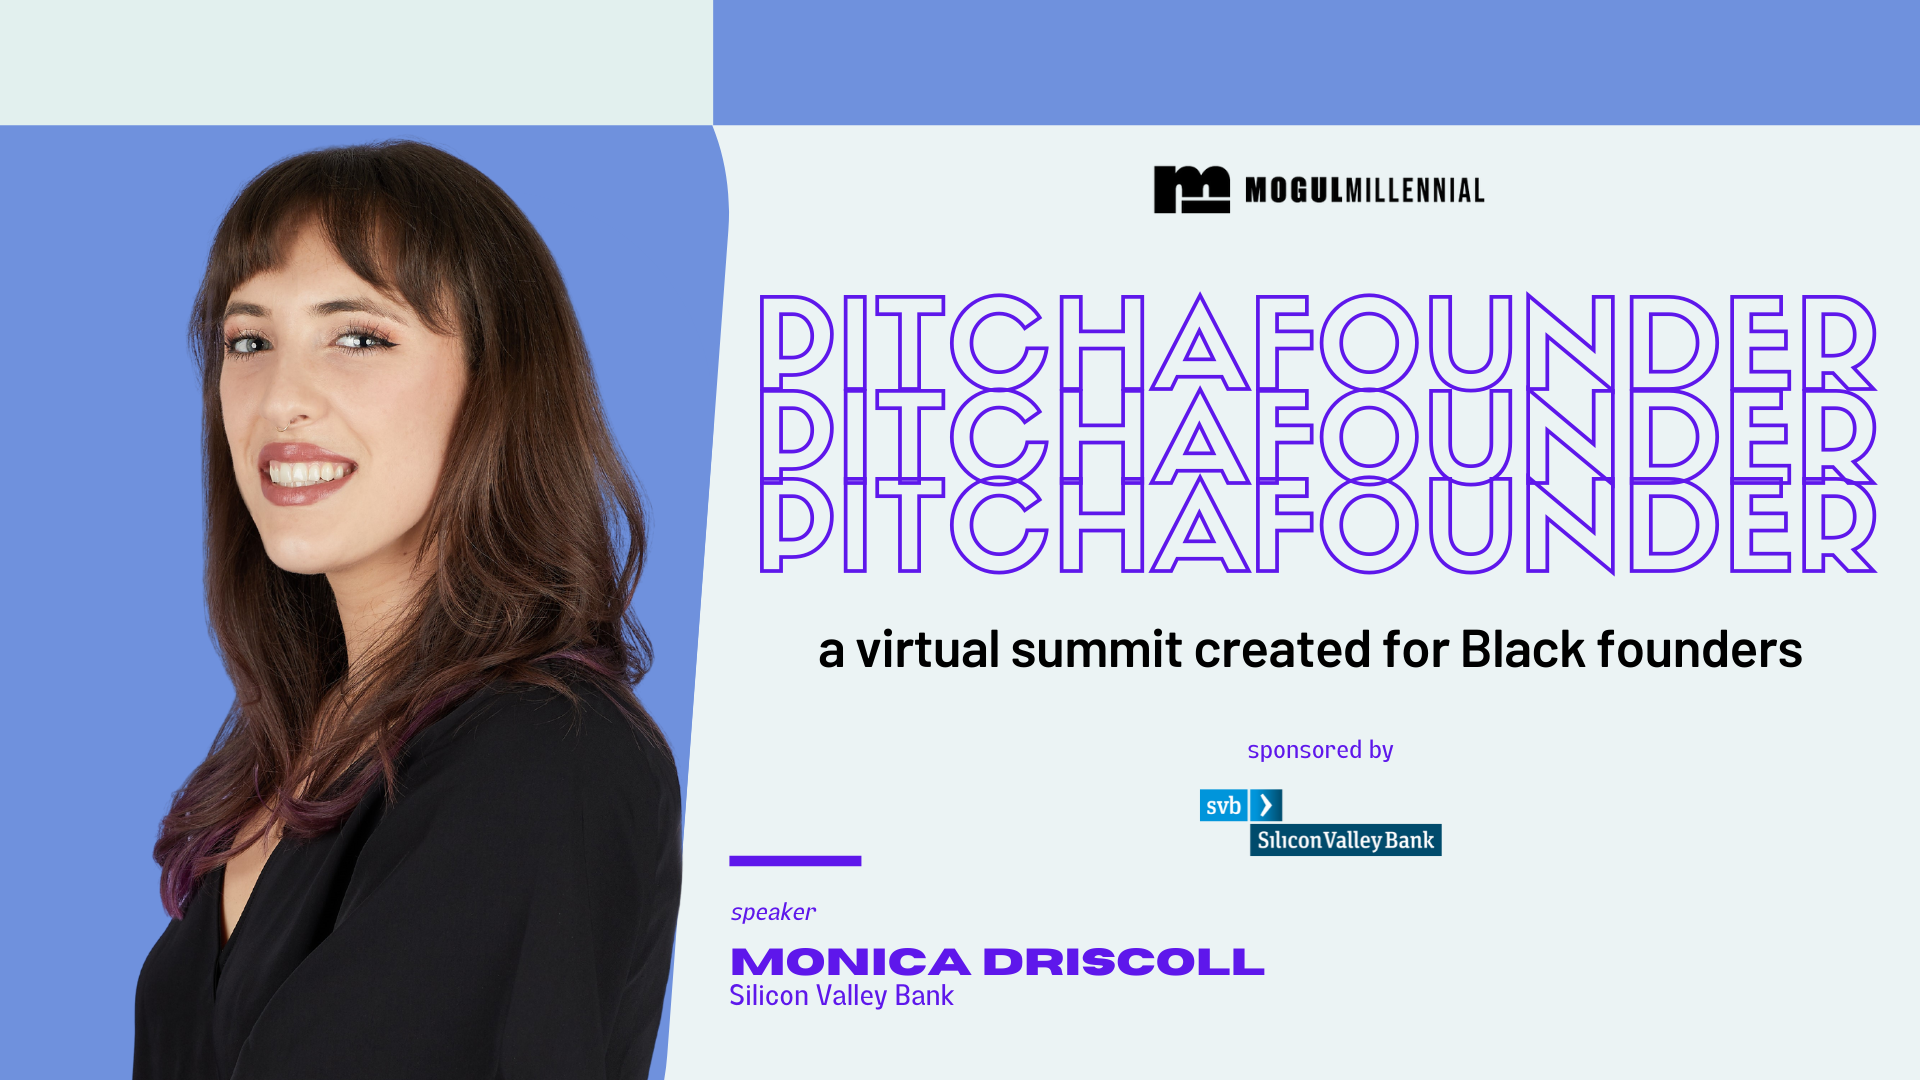 Monica Driscoll of Silicon Valley Bank at Pitch a Founder